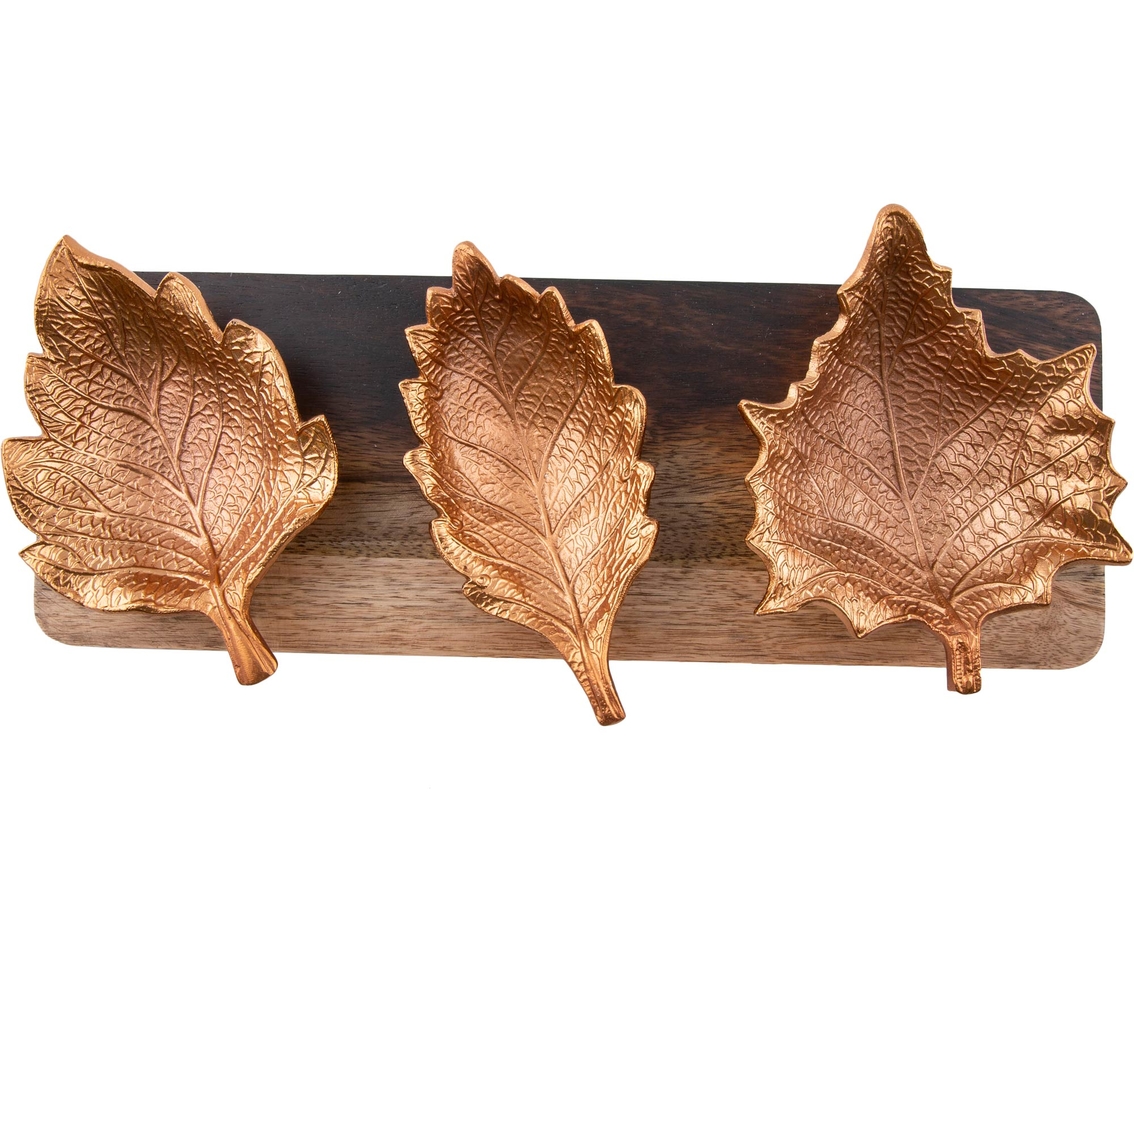 Thirstystone Fall Harvest Copper Leaf Bowls 4pc in Wood Tray - Image 2 of 2